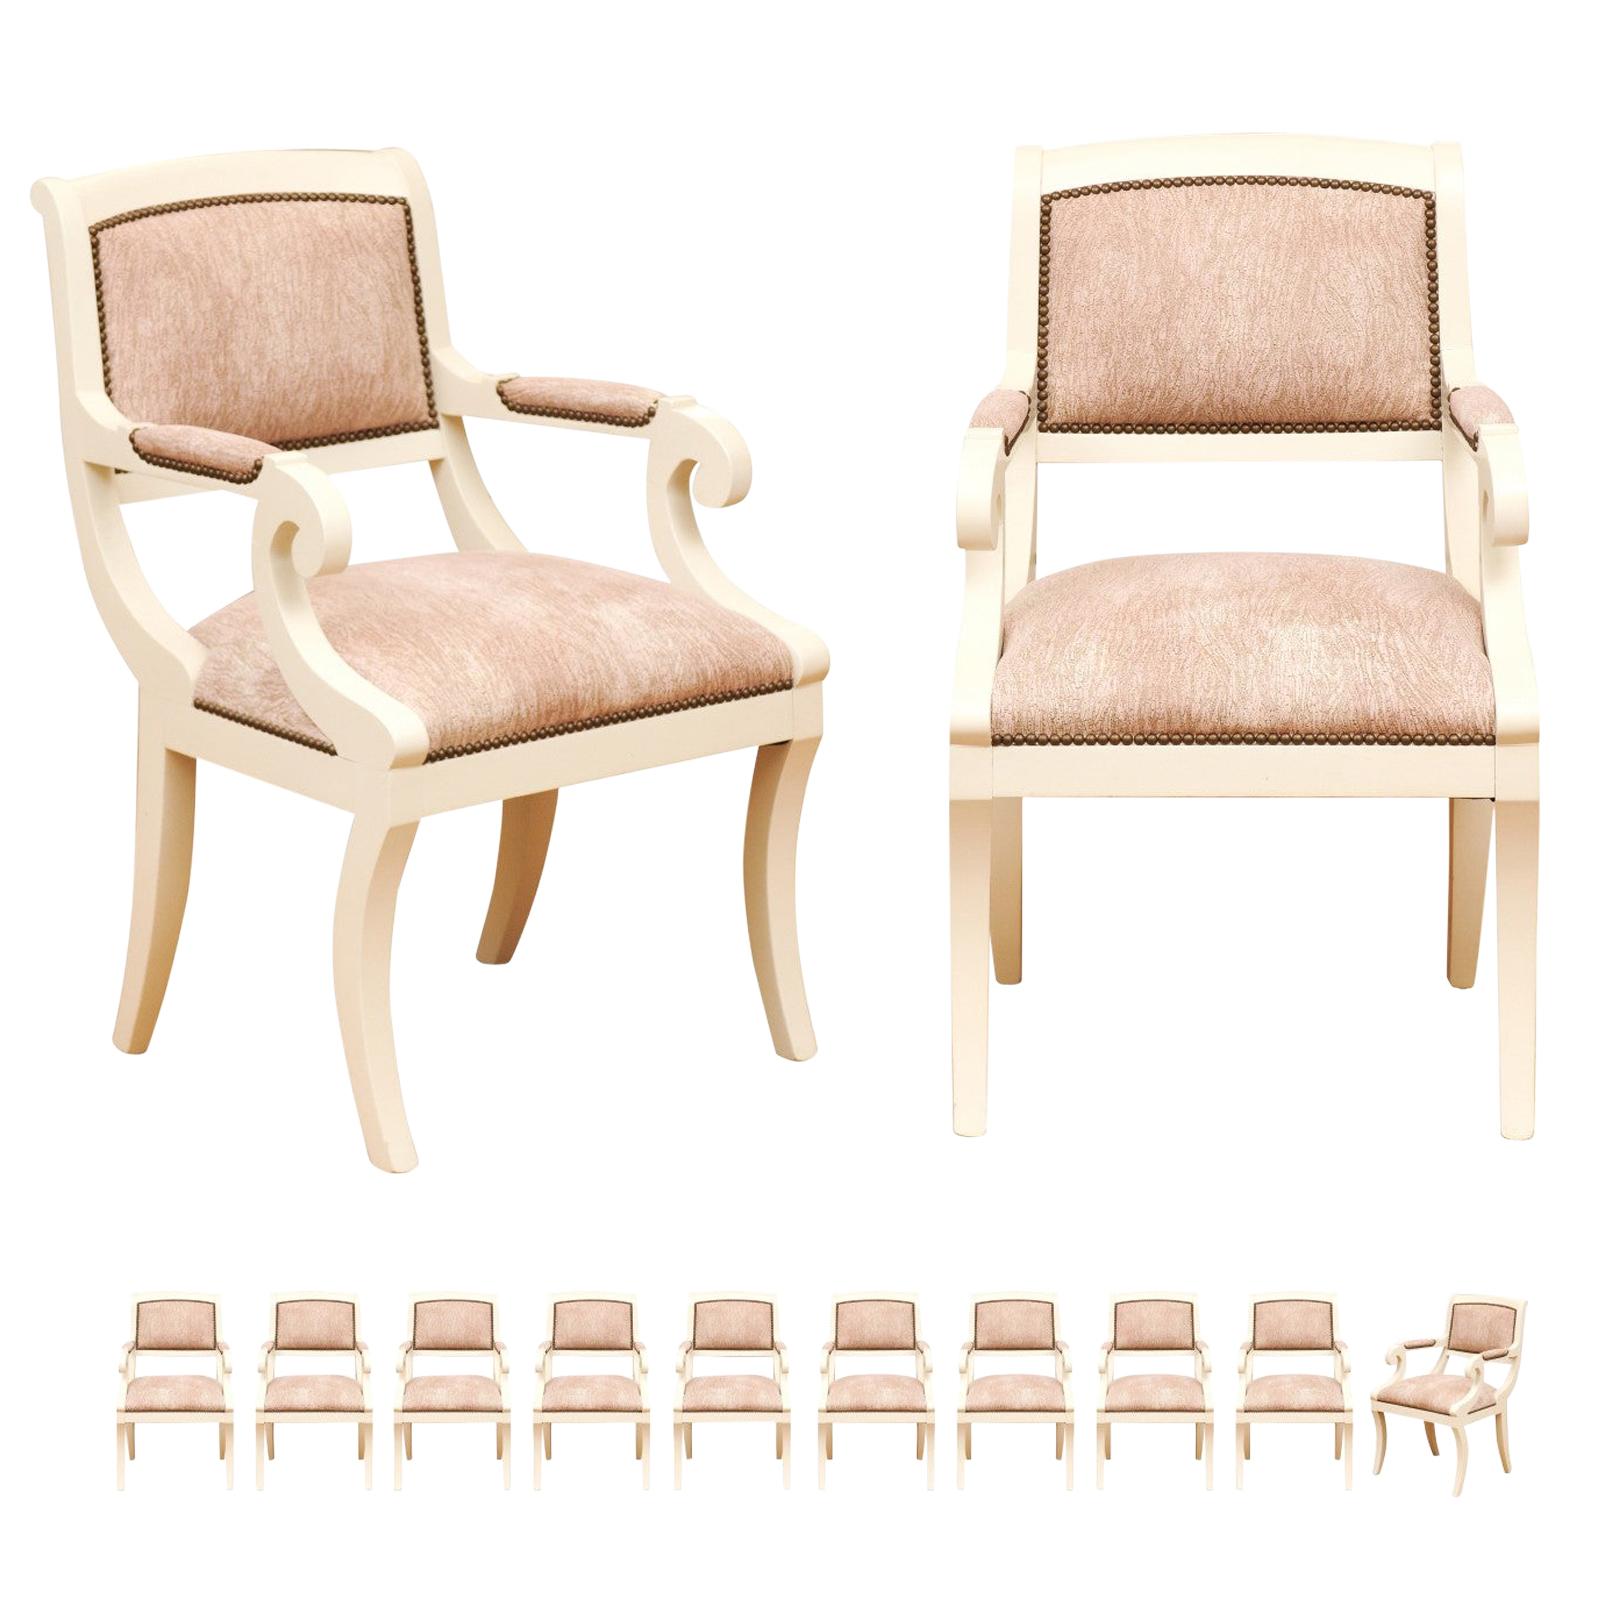 Sophisticated Set of 12 Modern Regency Style Klismos Chairs, Italy, circa 1970